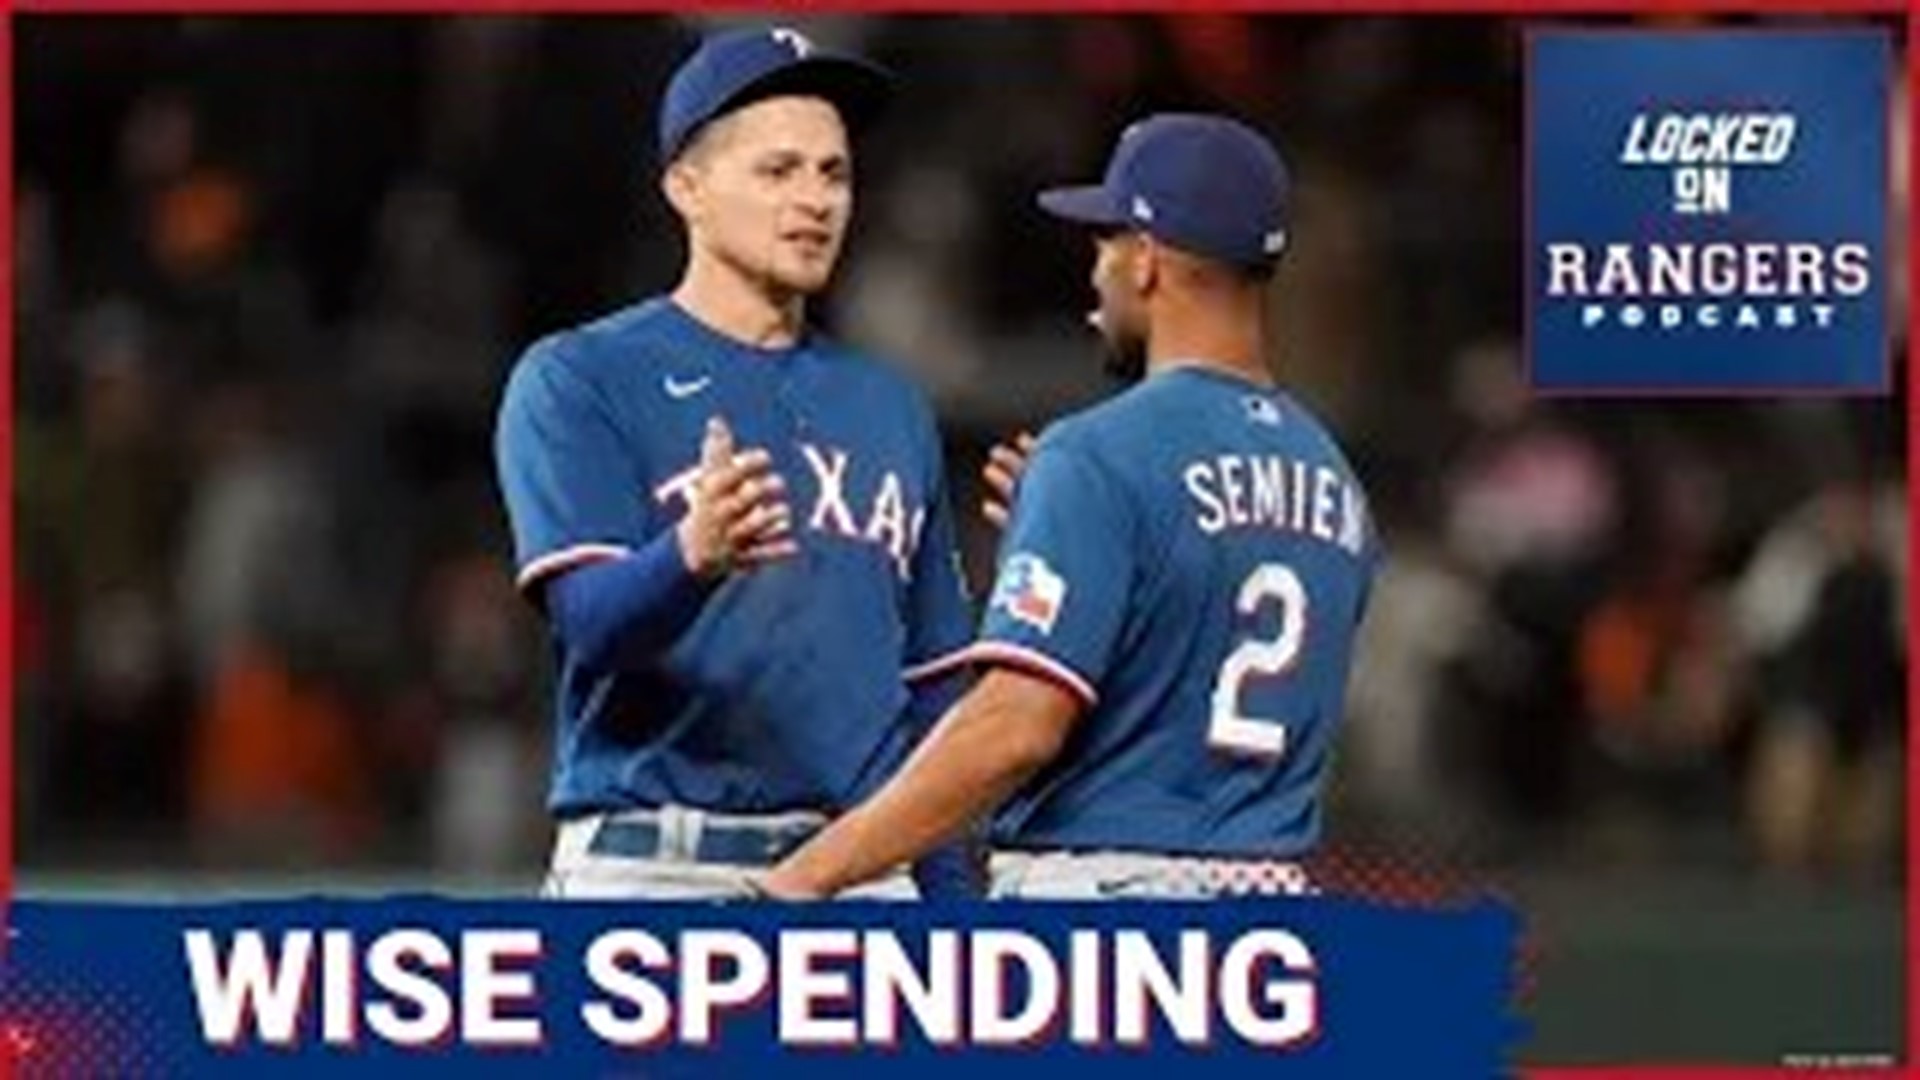 The Texas Rangers won their first World Series in franchise history by spending on big free agents like Corey Seager and Marcus Semien as well as Jacob deGrom.